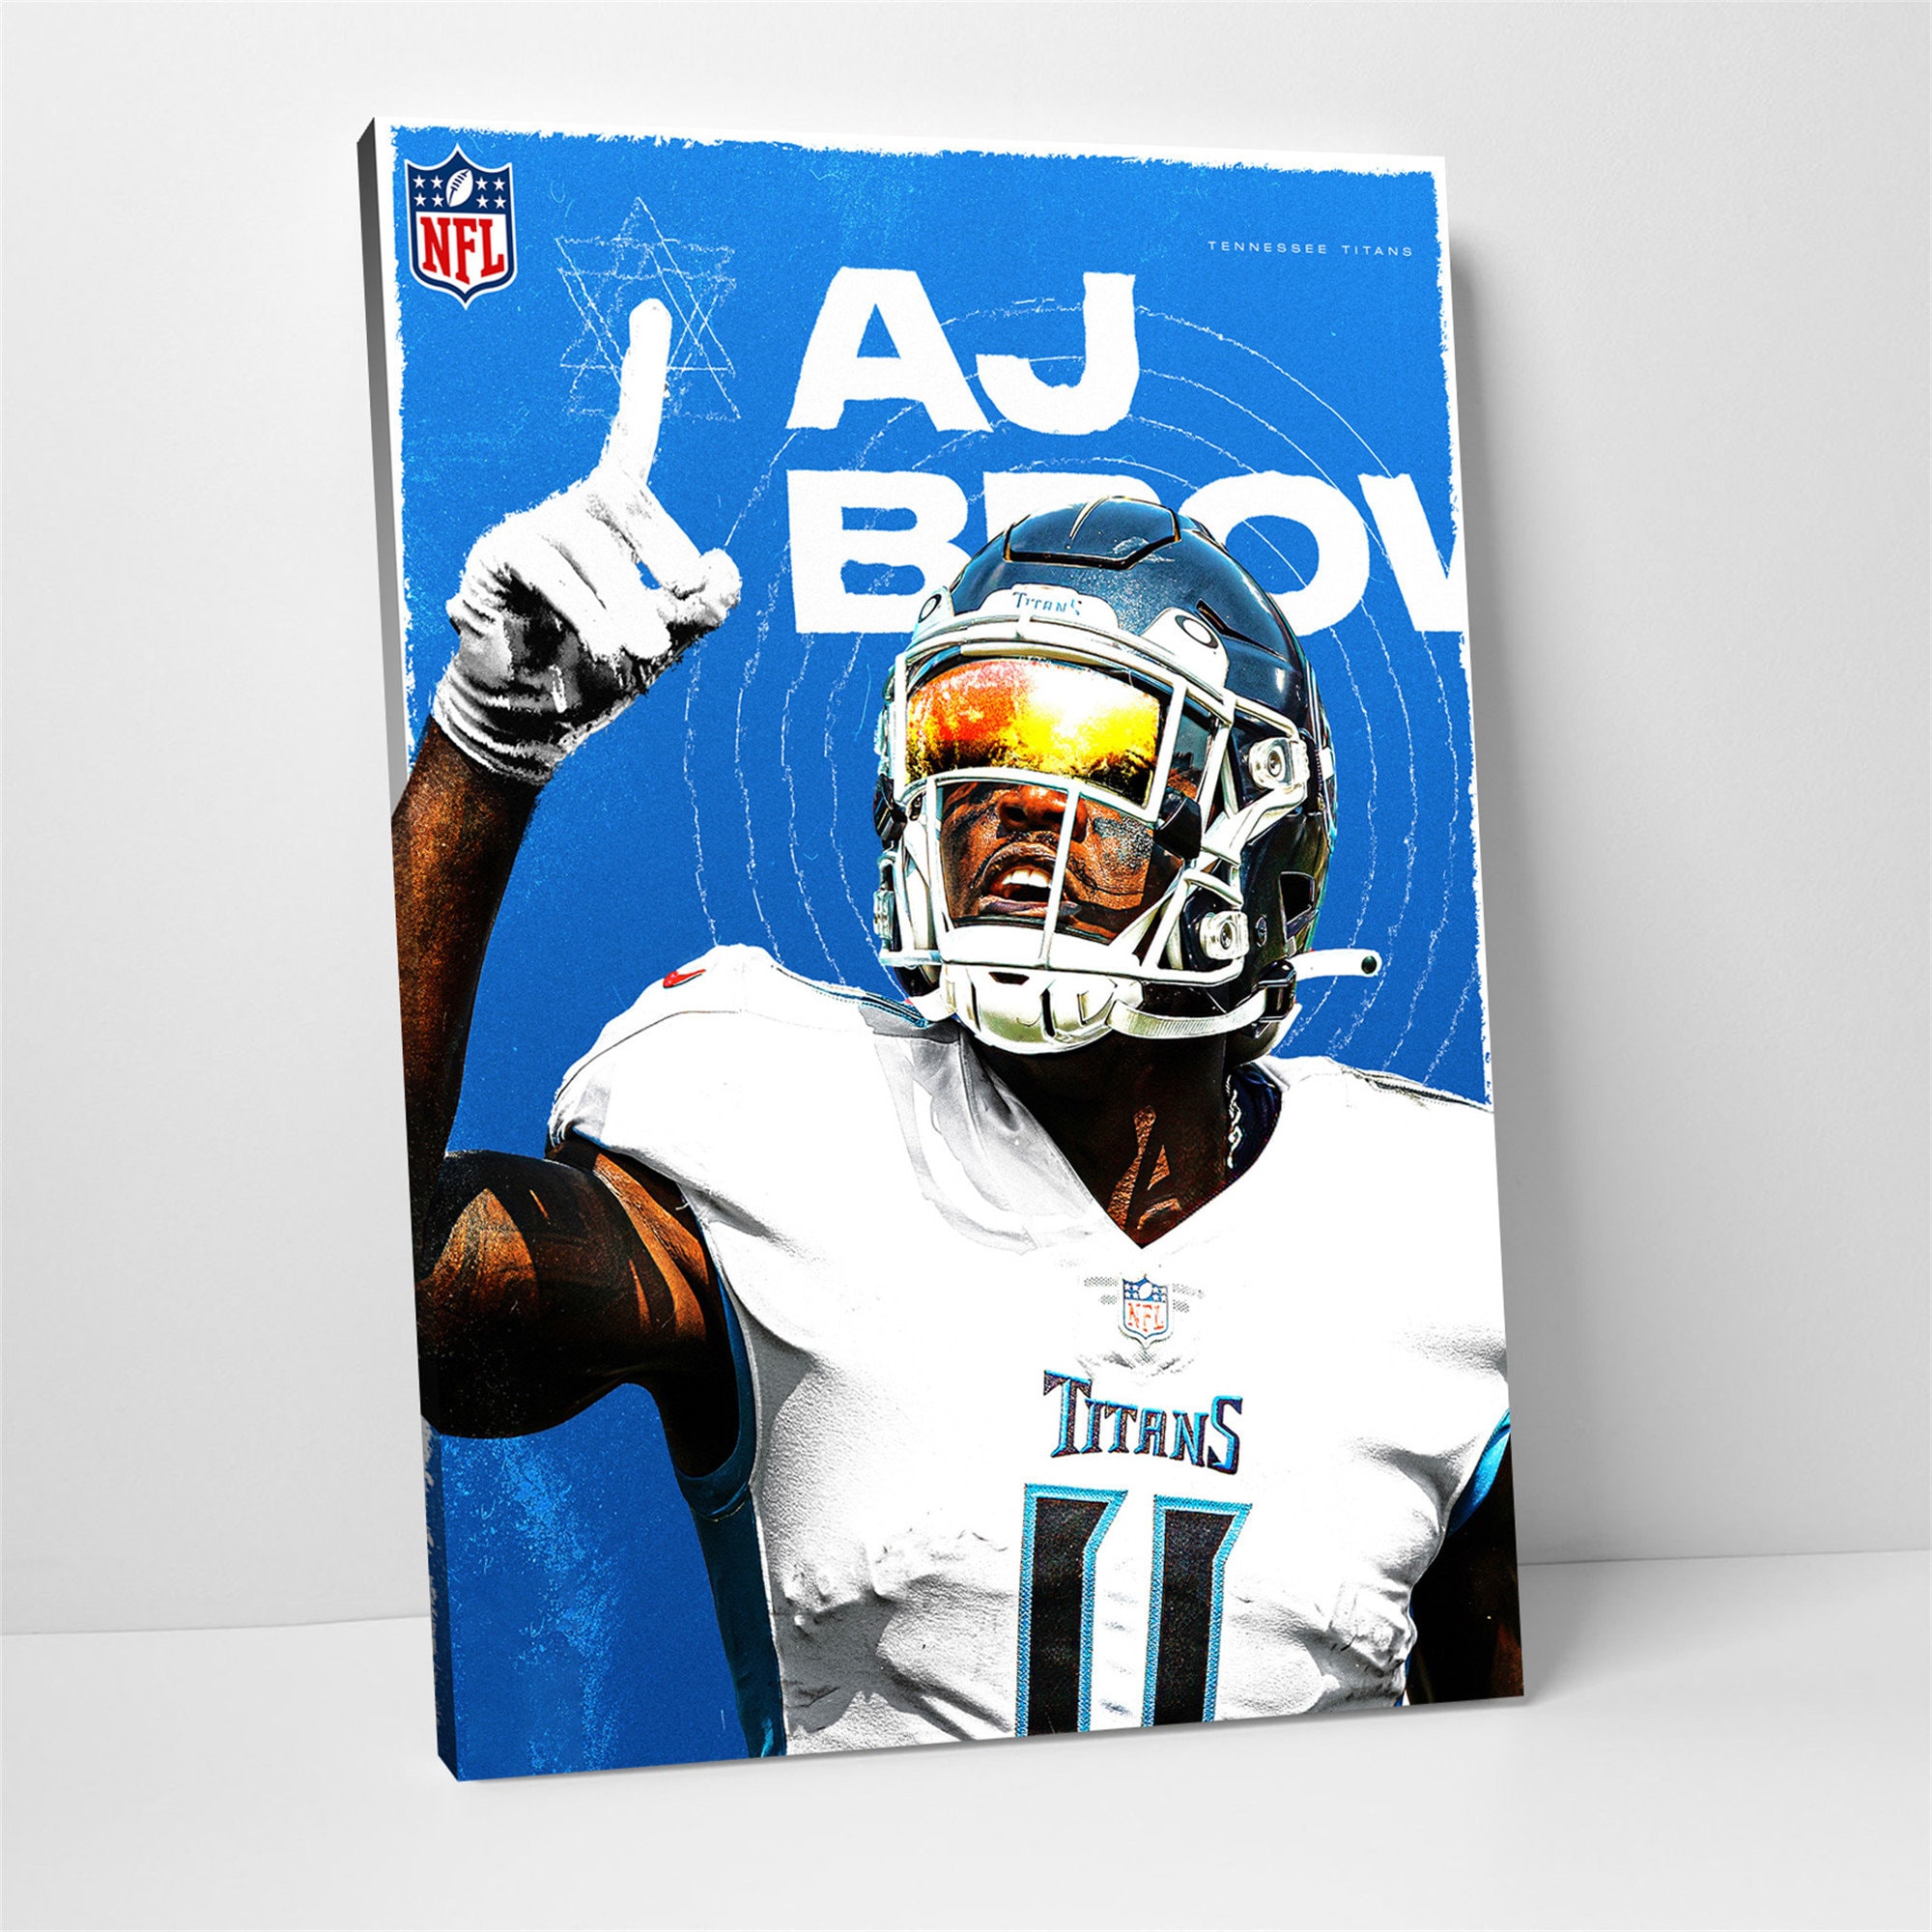 Derrick Henry TENNESSEE TITANS JERSEY NUMBER 22 OIL ART Poster by